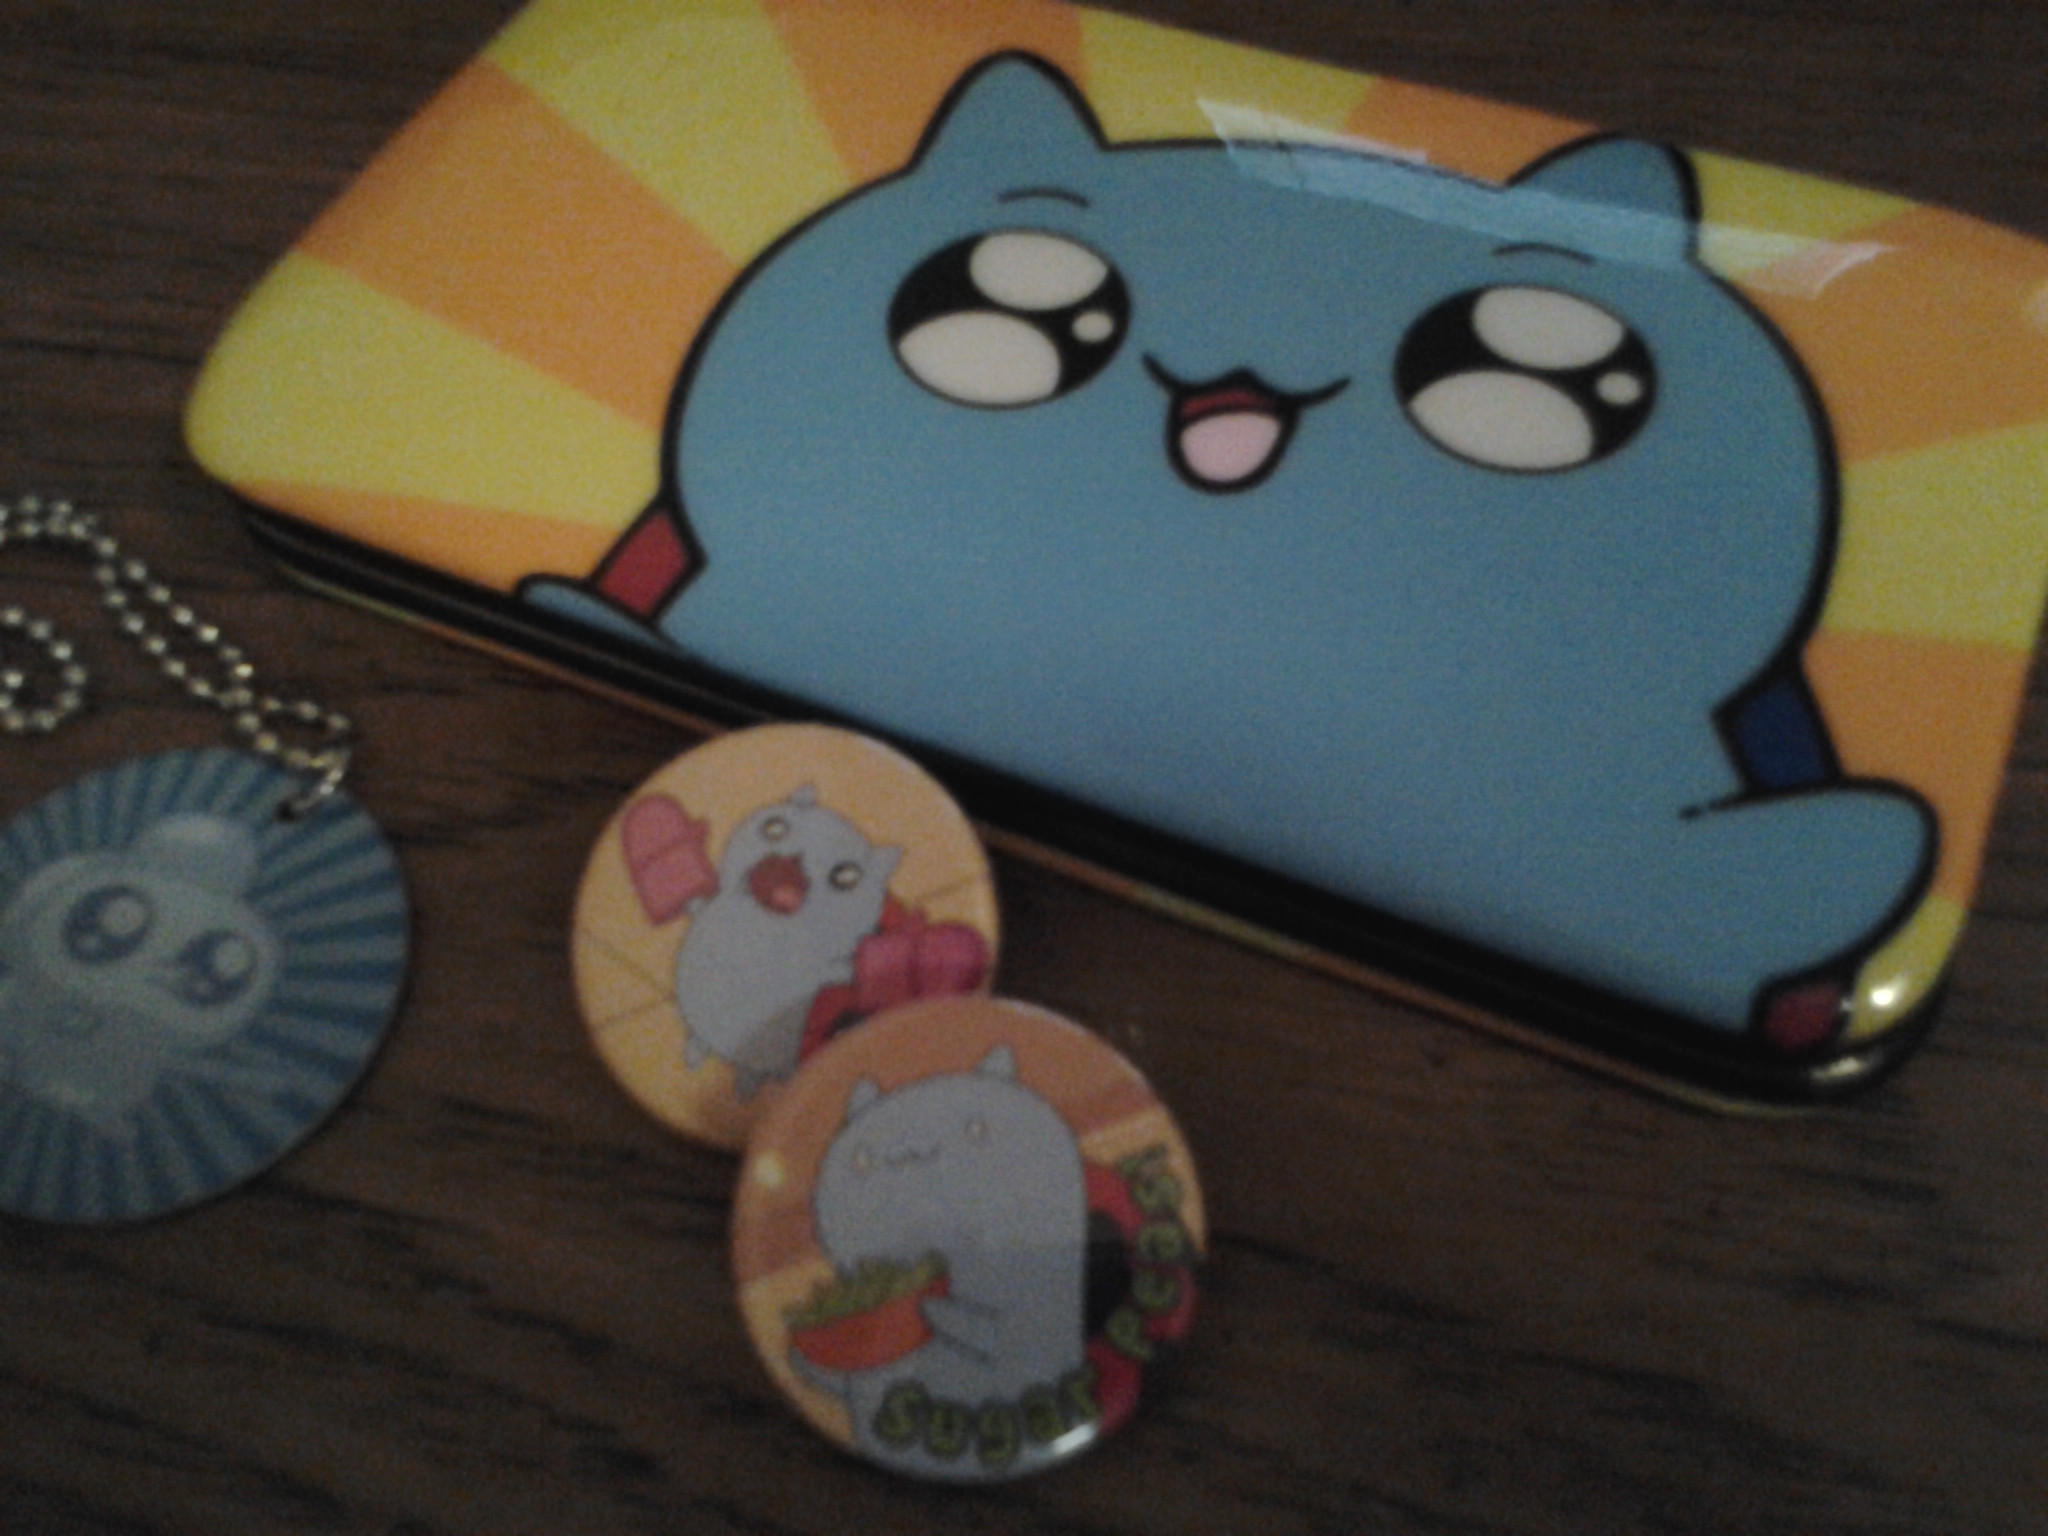 2048x1536 My clearanced CatBug loot from HT today!